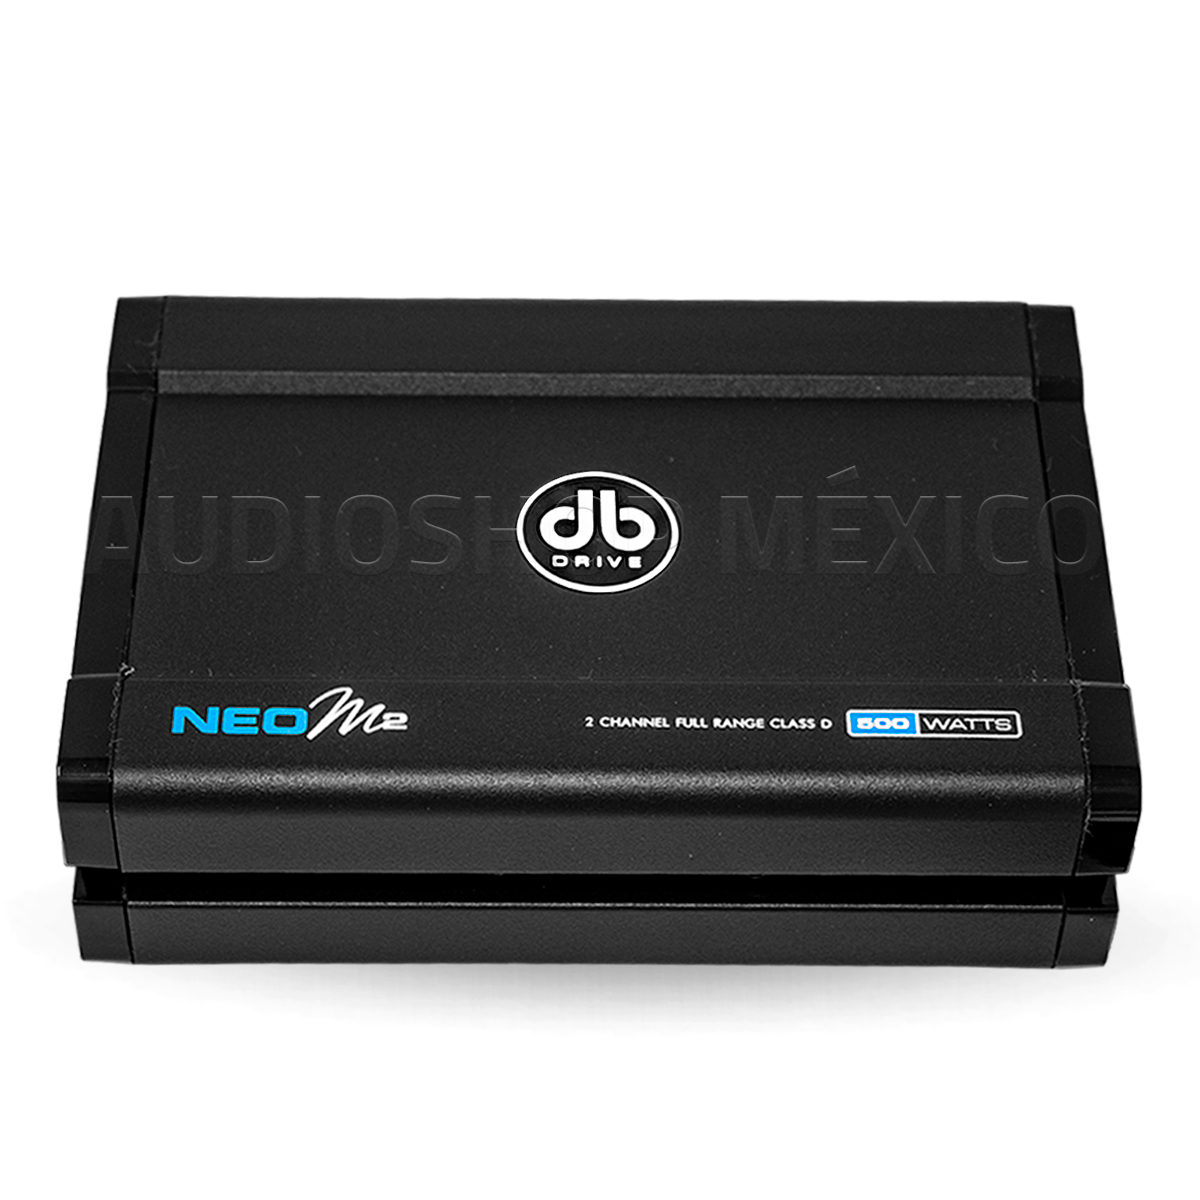 Amplificador Marino 2 Canales DB Drive NEO M2 500 Watts Clase D 2 Ohms